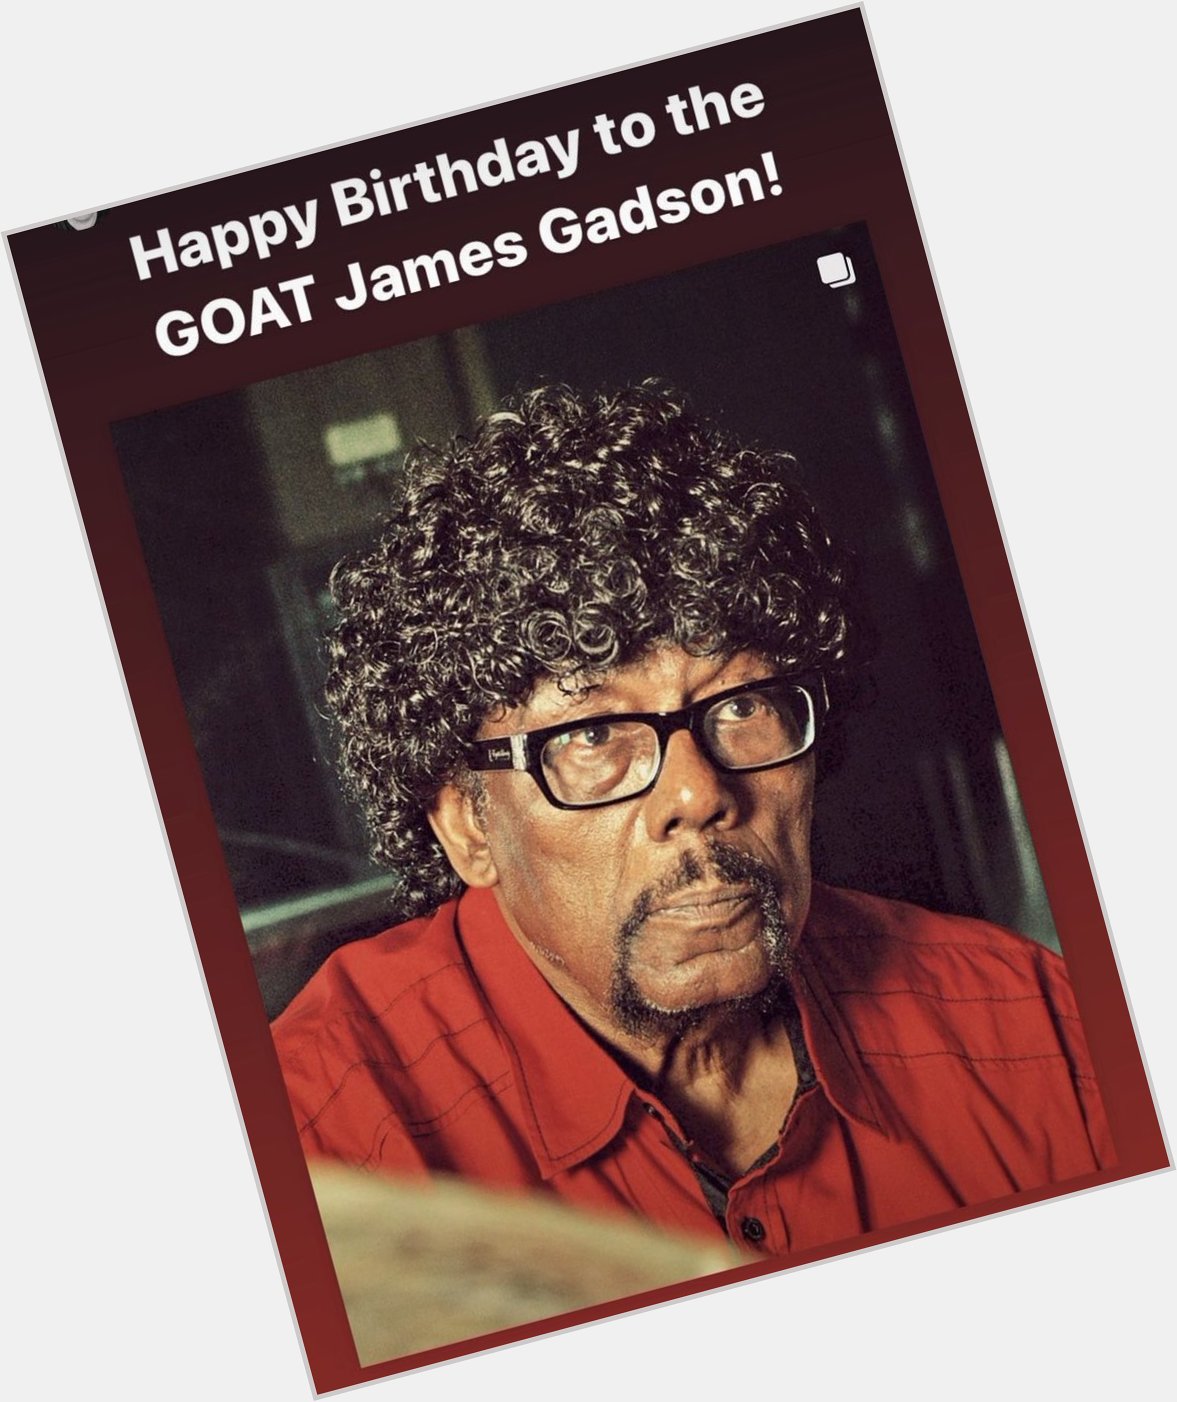 Happy Birthday to the funkiest drummer the one and only James Gadson! 